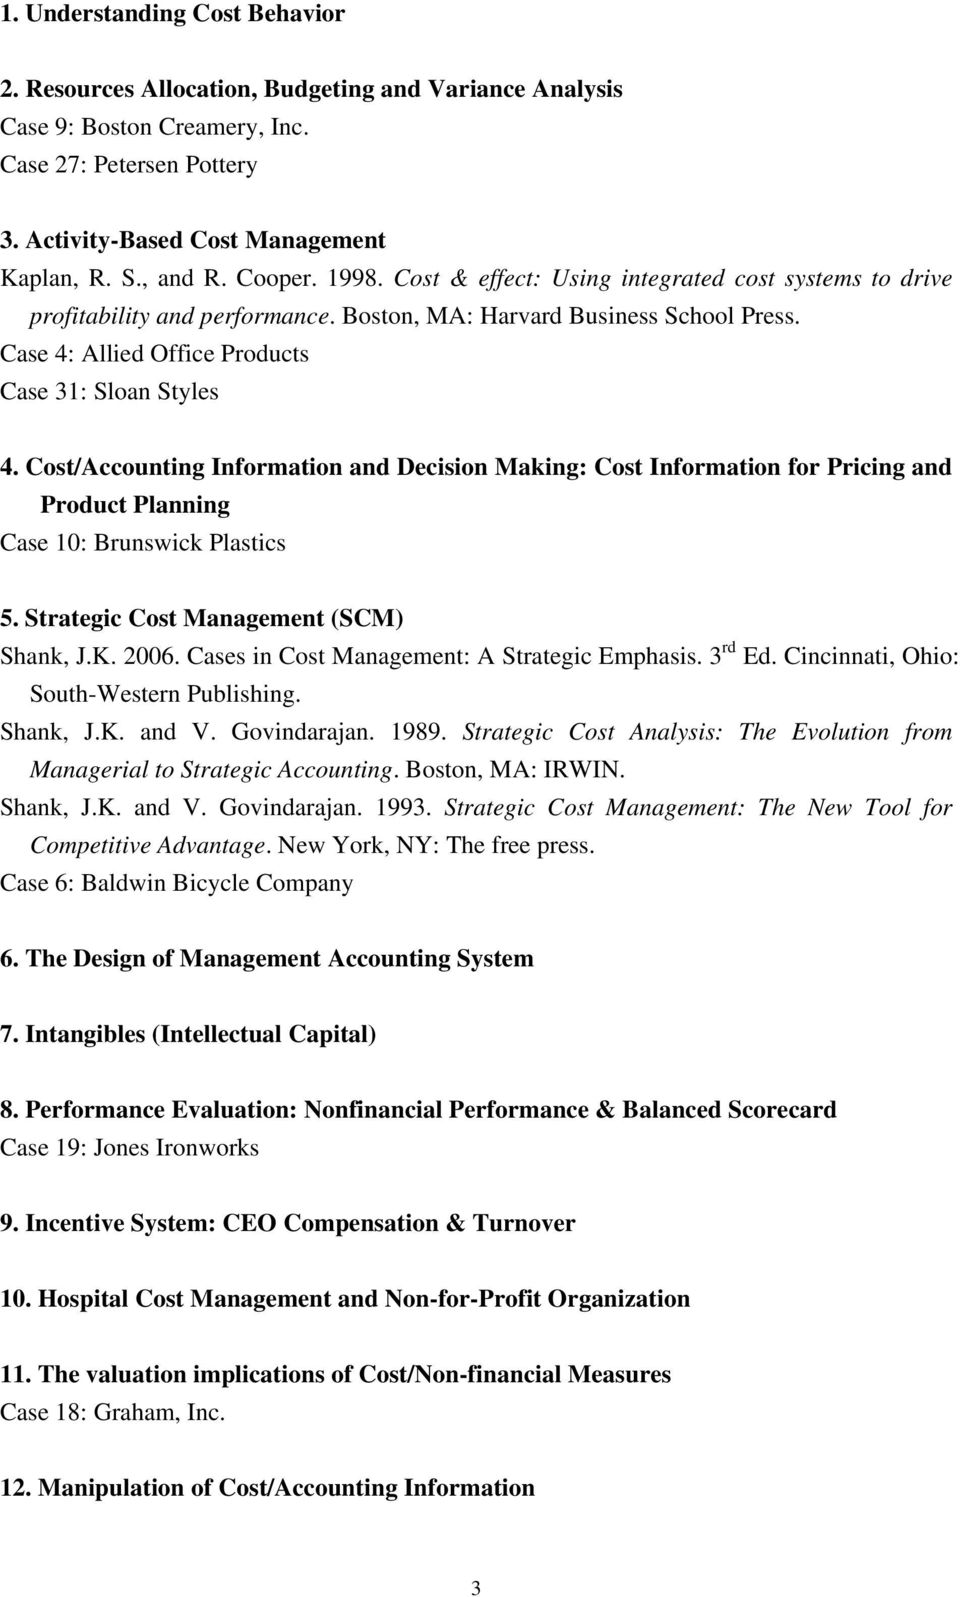 Cost/Accounting Information and Decision Making: Cost Information for Pricing and Product Planning Case 10: Brunswick Plastics 5. Strategic Cost Management (SCM) Shank, J.K. 2006.